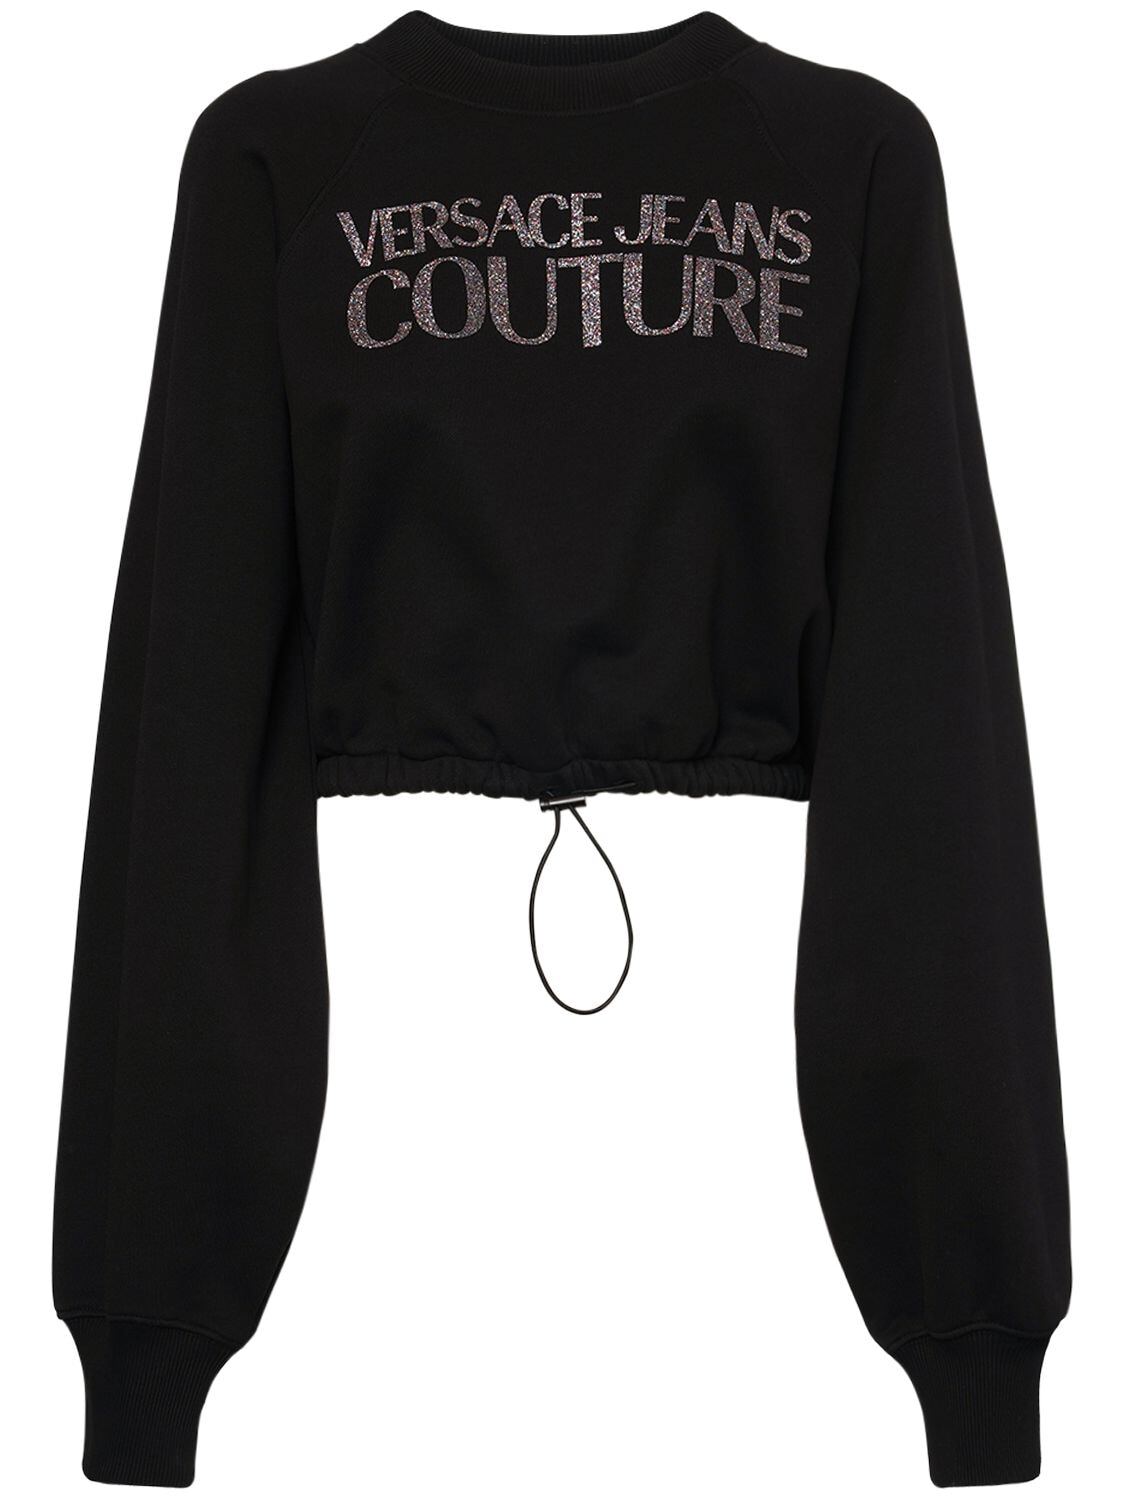 VERSACE JEANS COUTURE Glittered Logo Cotton Jersey Sweatshirt in black